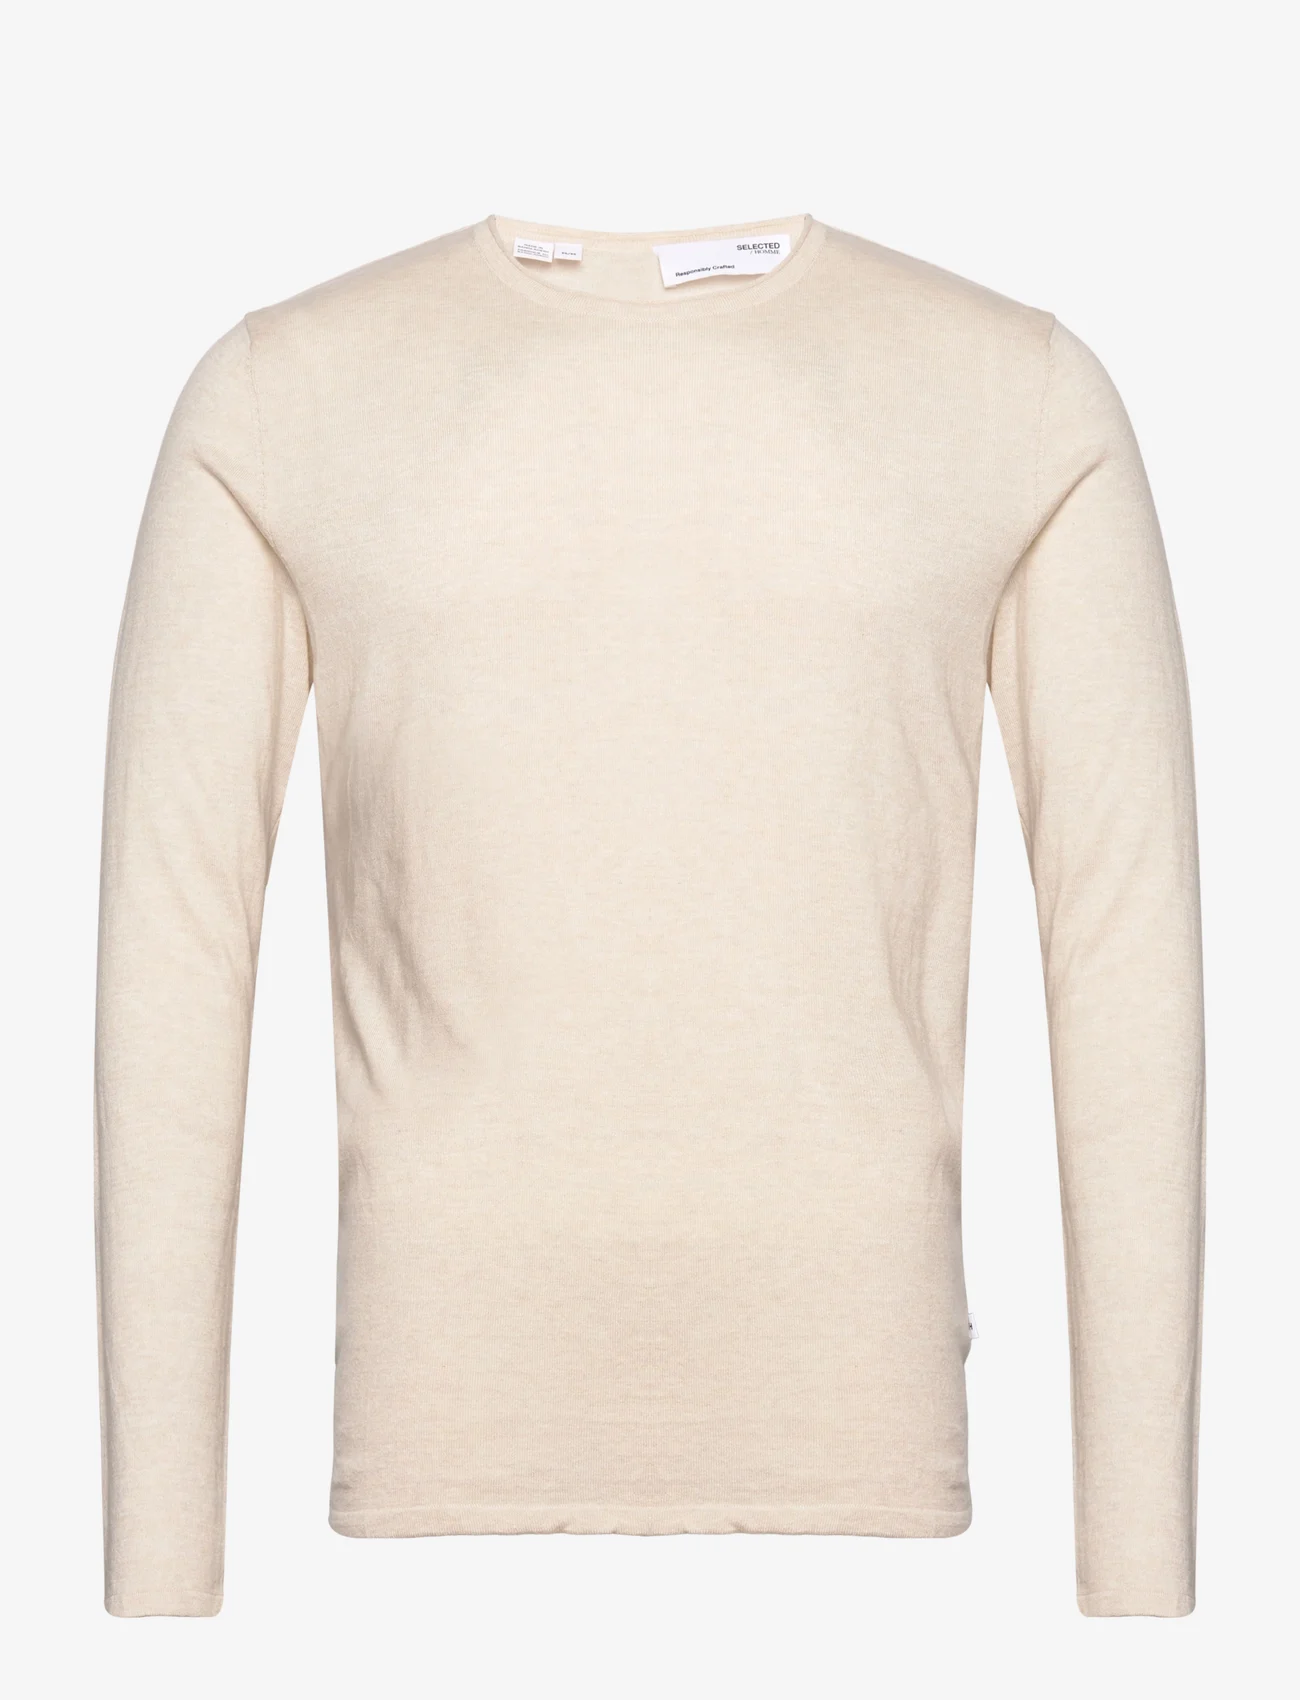 Selected Homme - SLHROME LS KNIT CREW NECK NOOS - knitted round necks - angora - 0